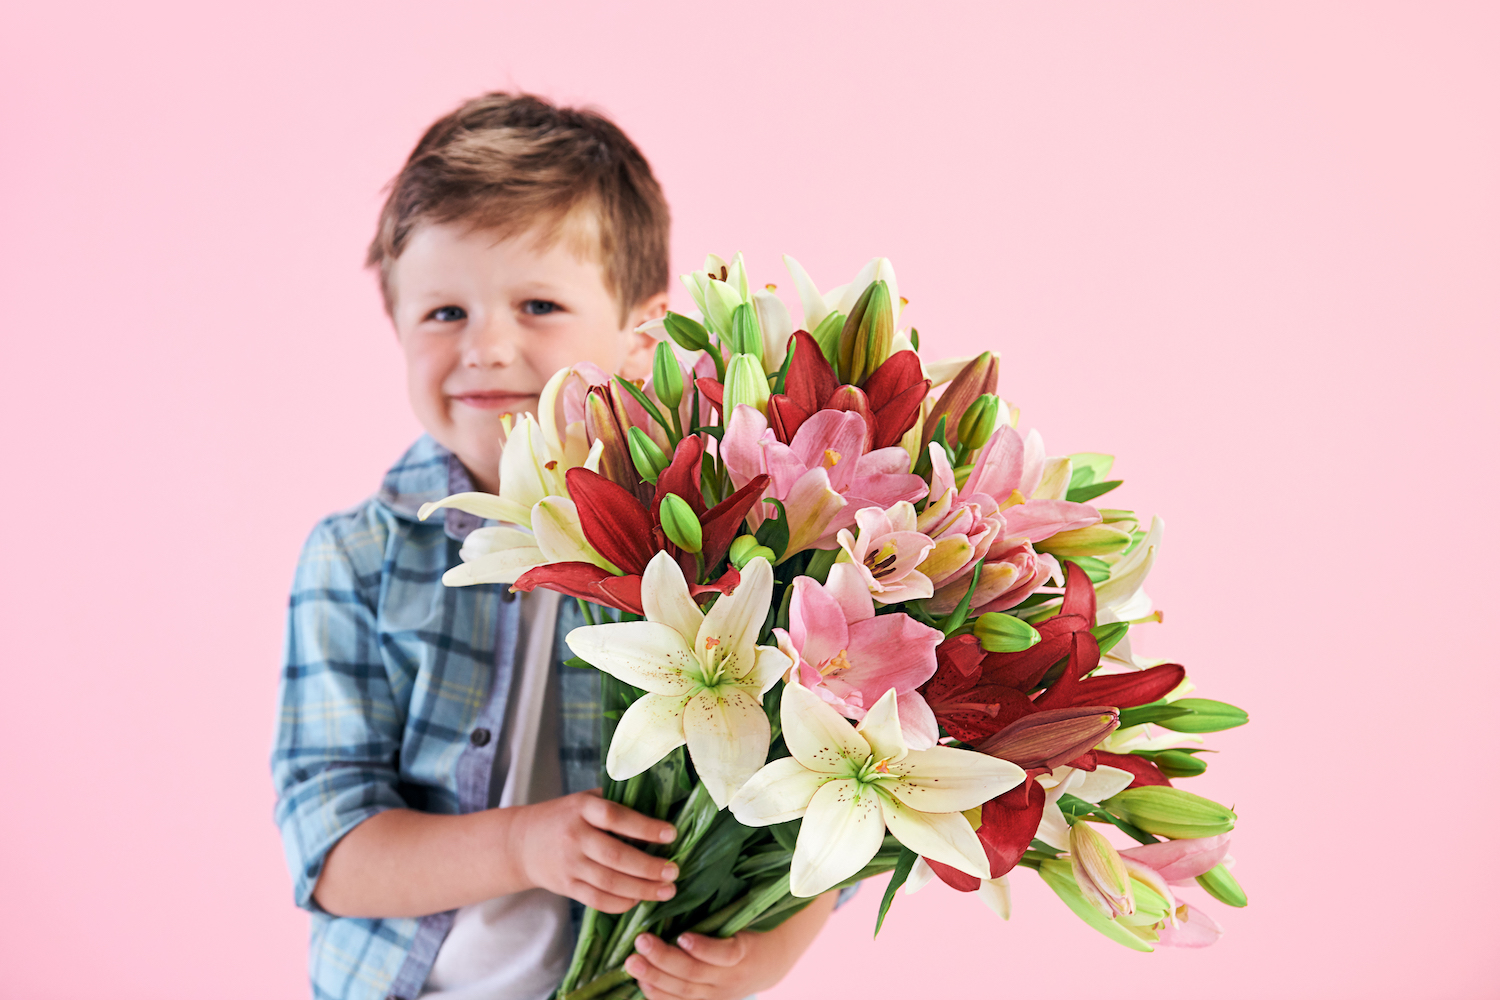 The Online Flower Delivery Singapore